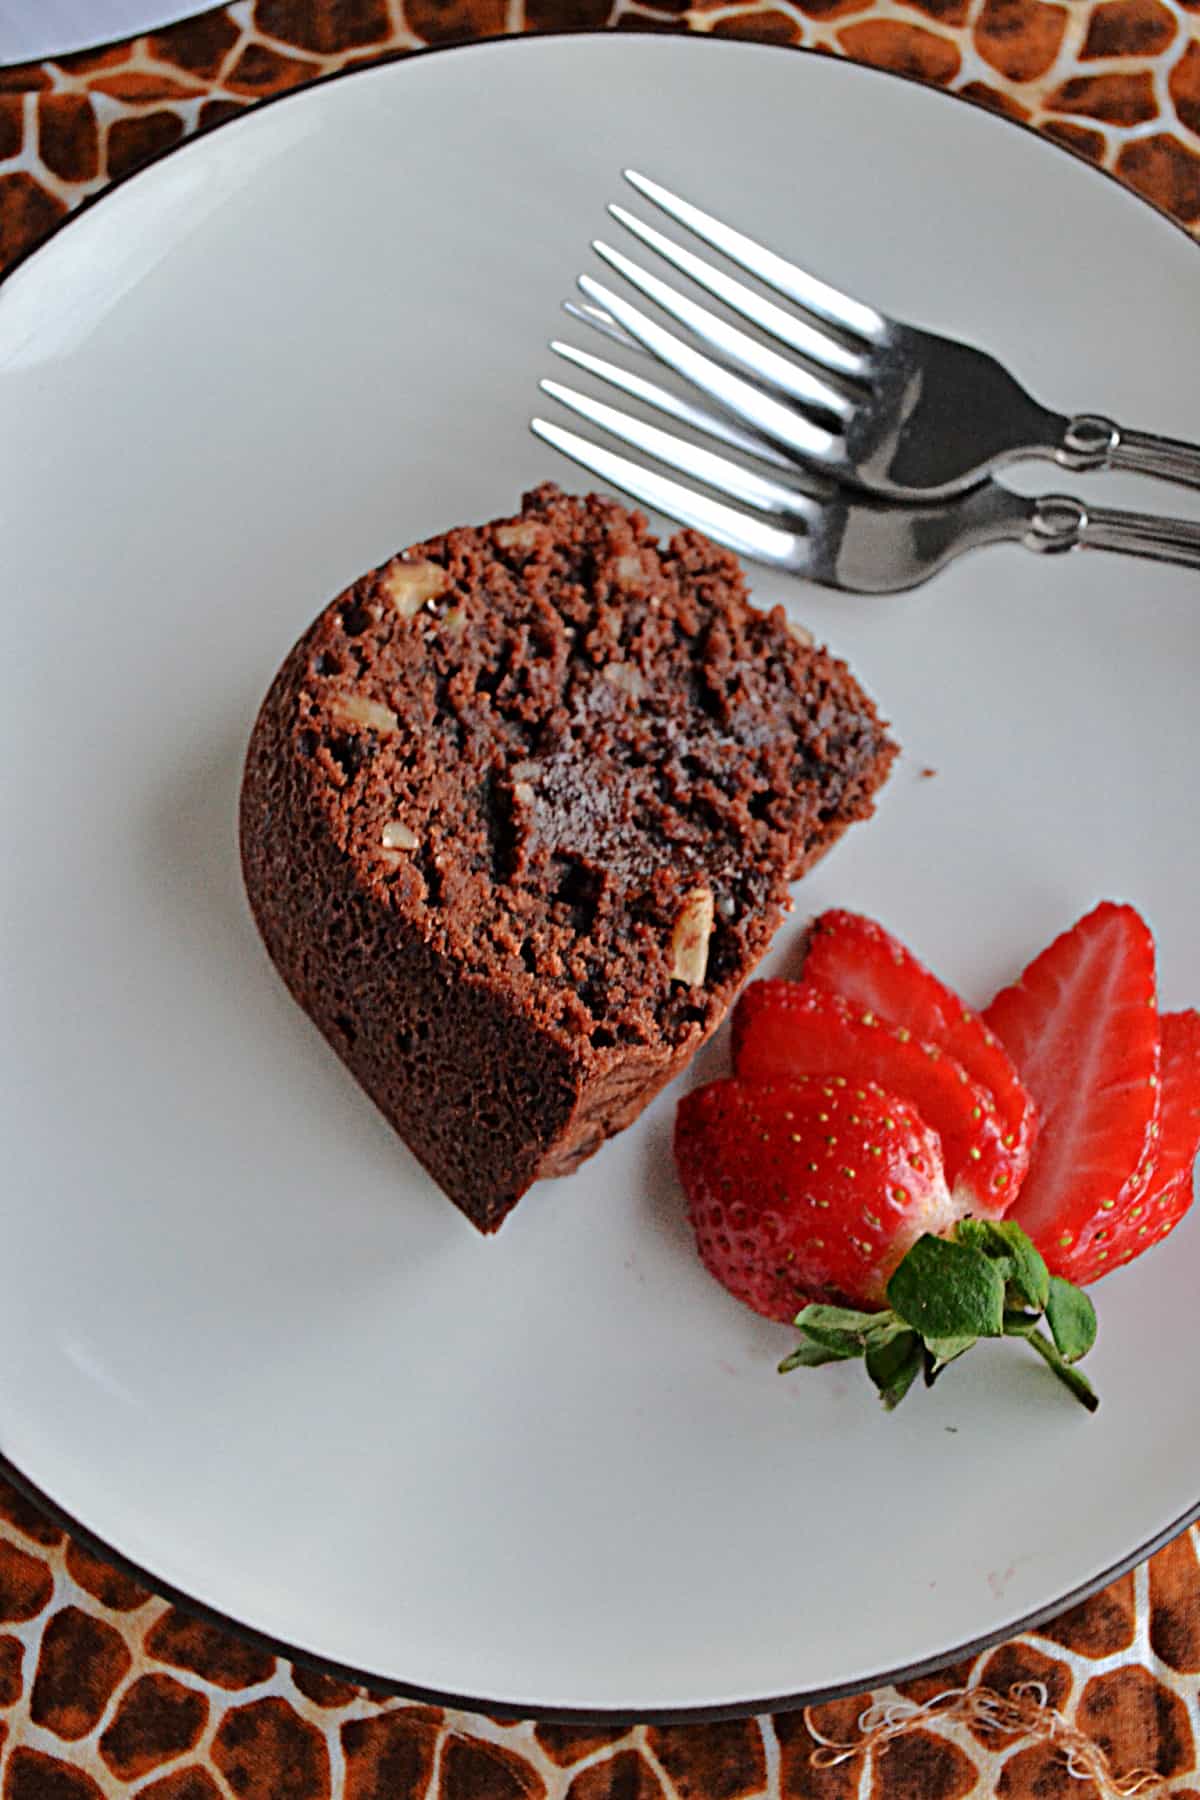 A close up of a slice of Tunnel of Fudge cake with a strawberry next to it.